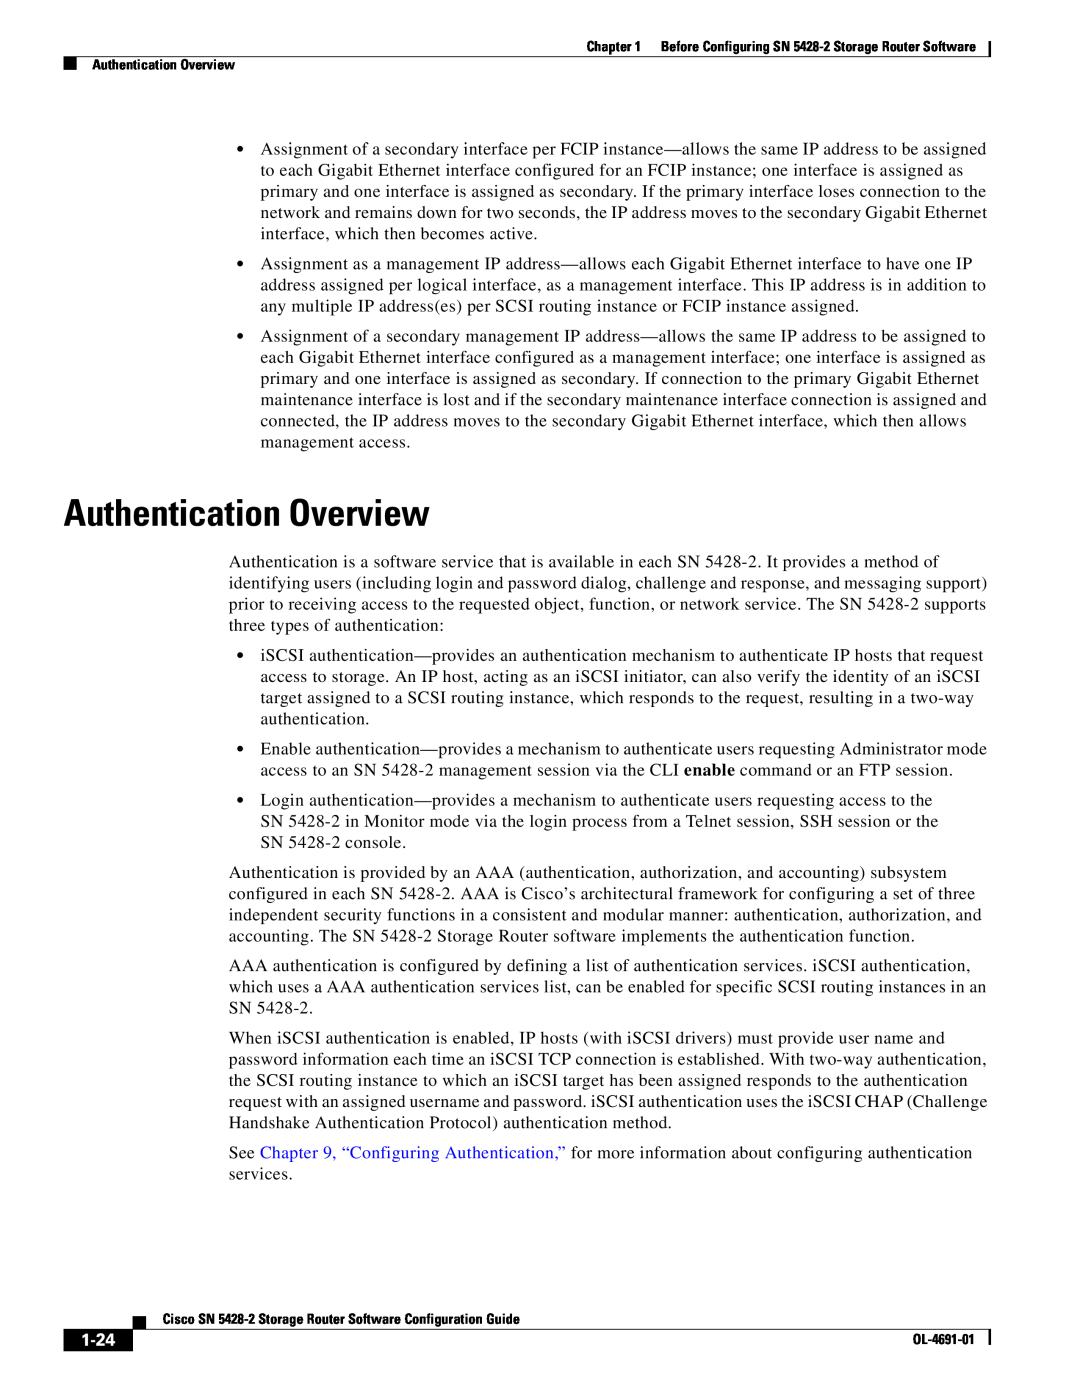 Cisco Systems SN 5428-2 manual Authentication Overview, 1-24 